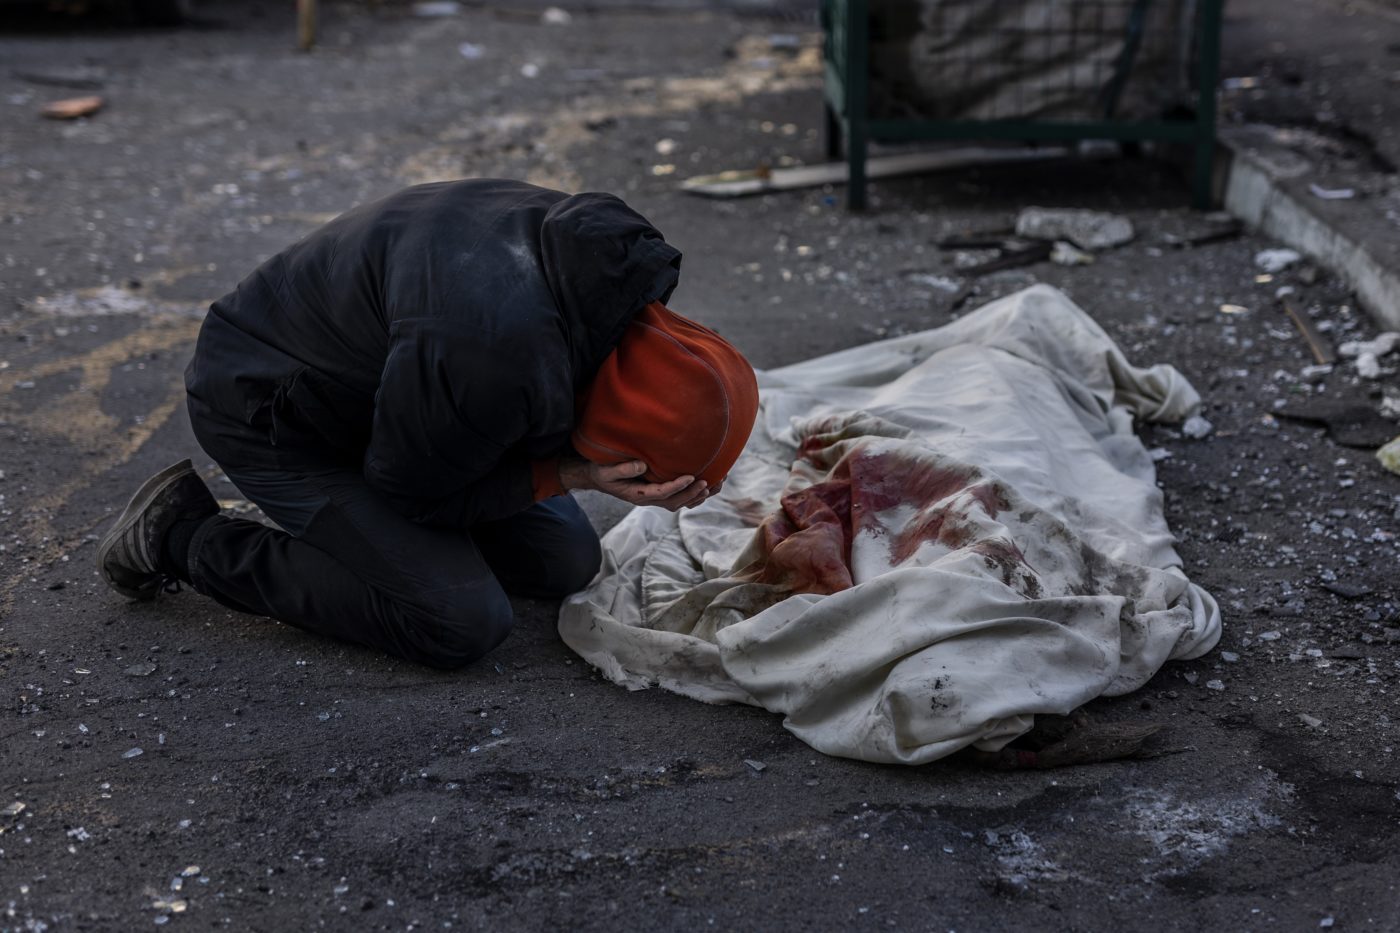 A person on their knees is hunched over the covered and bloody body of a loved one.